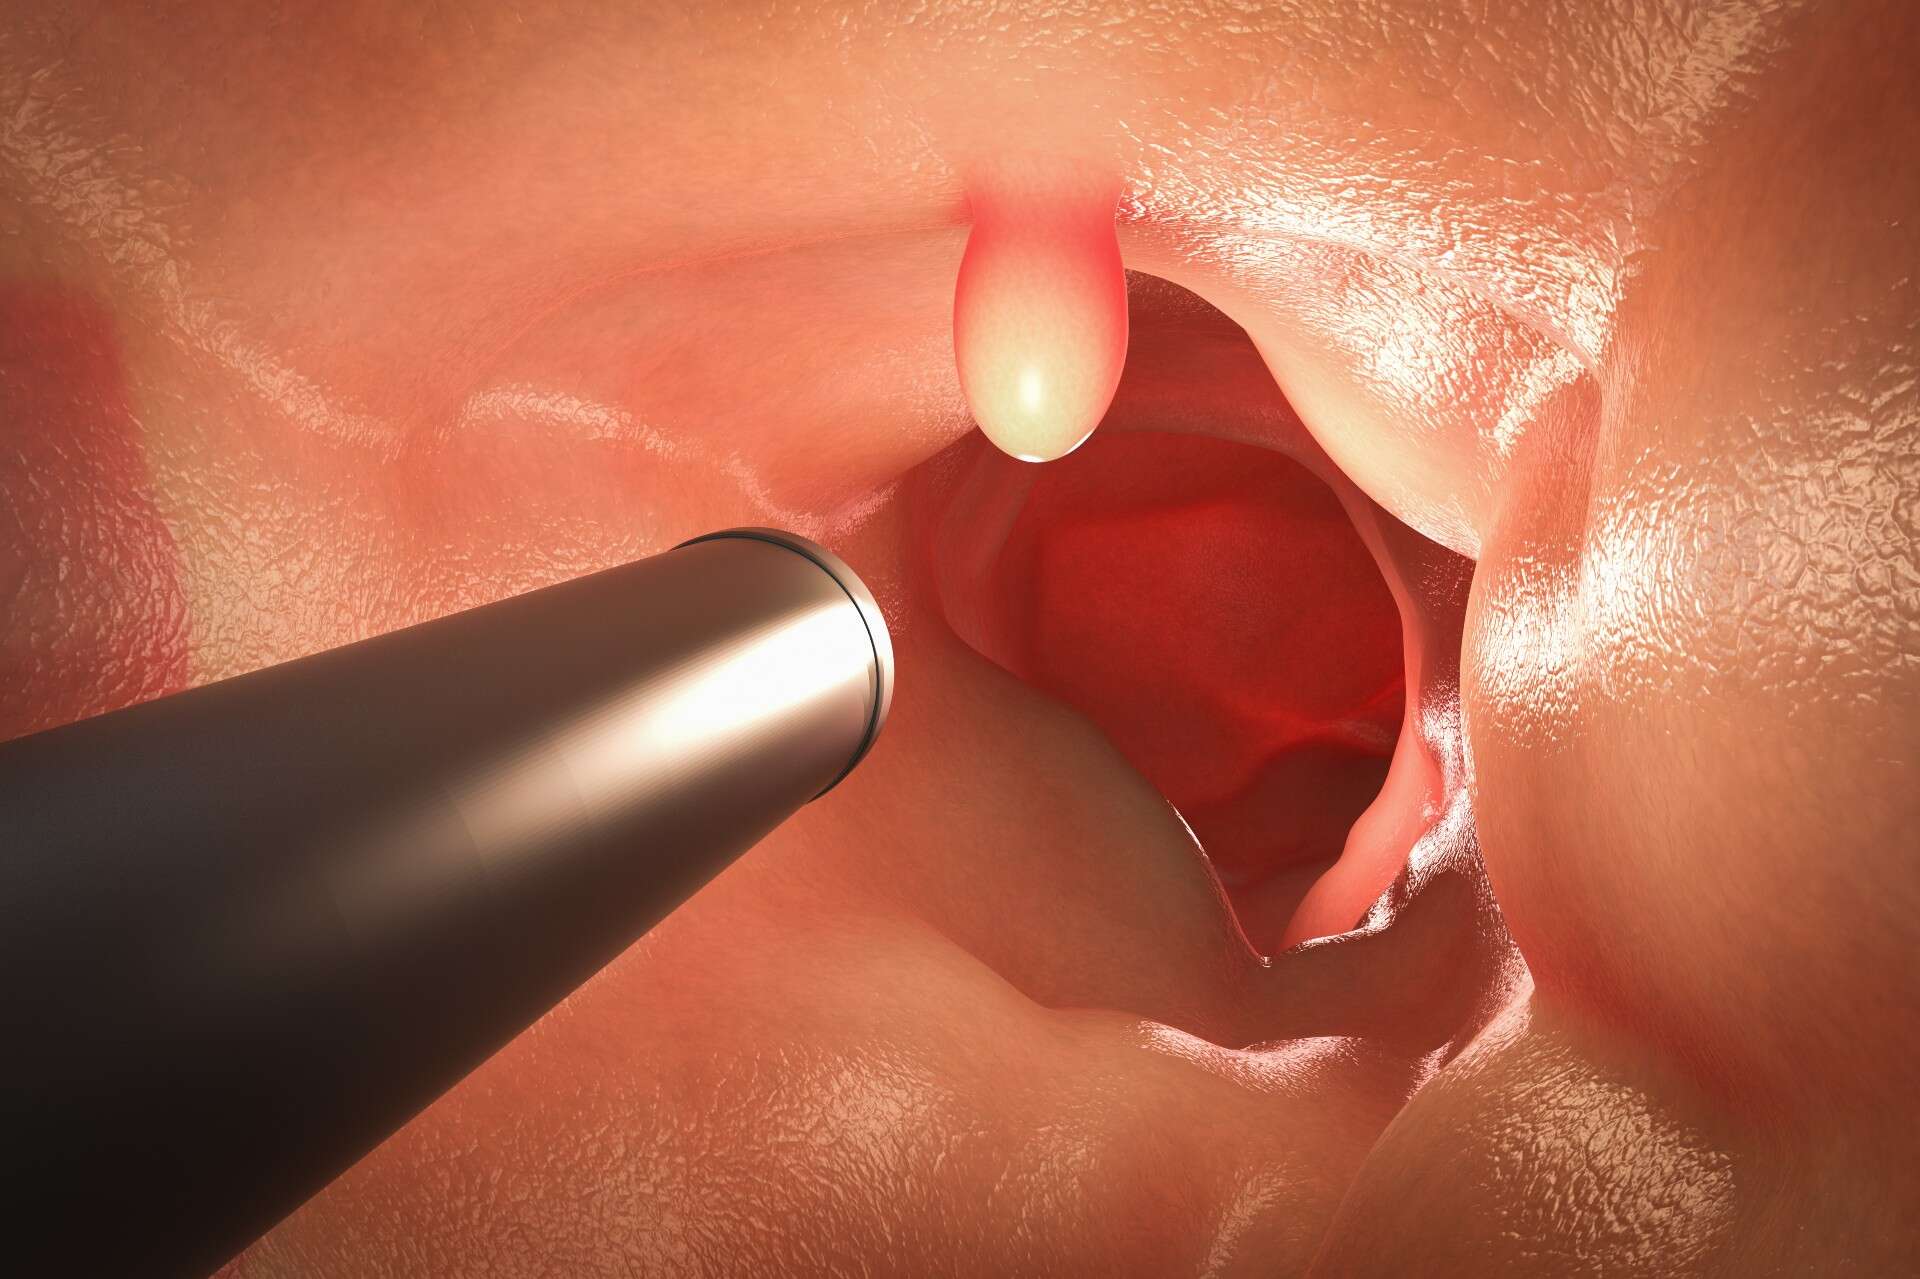 A study finds that colonoscopy does not reduce the risk of death from colorectal cancer